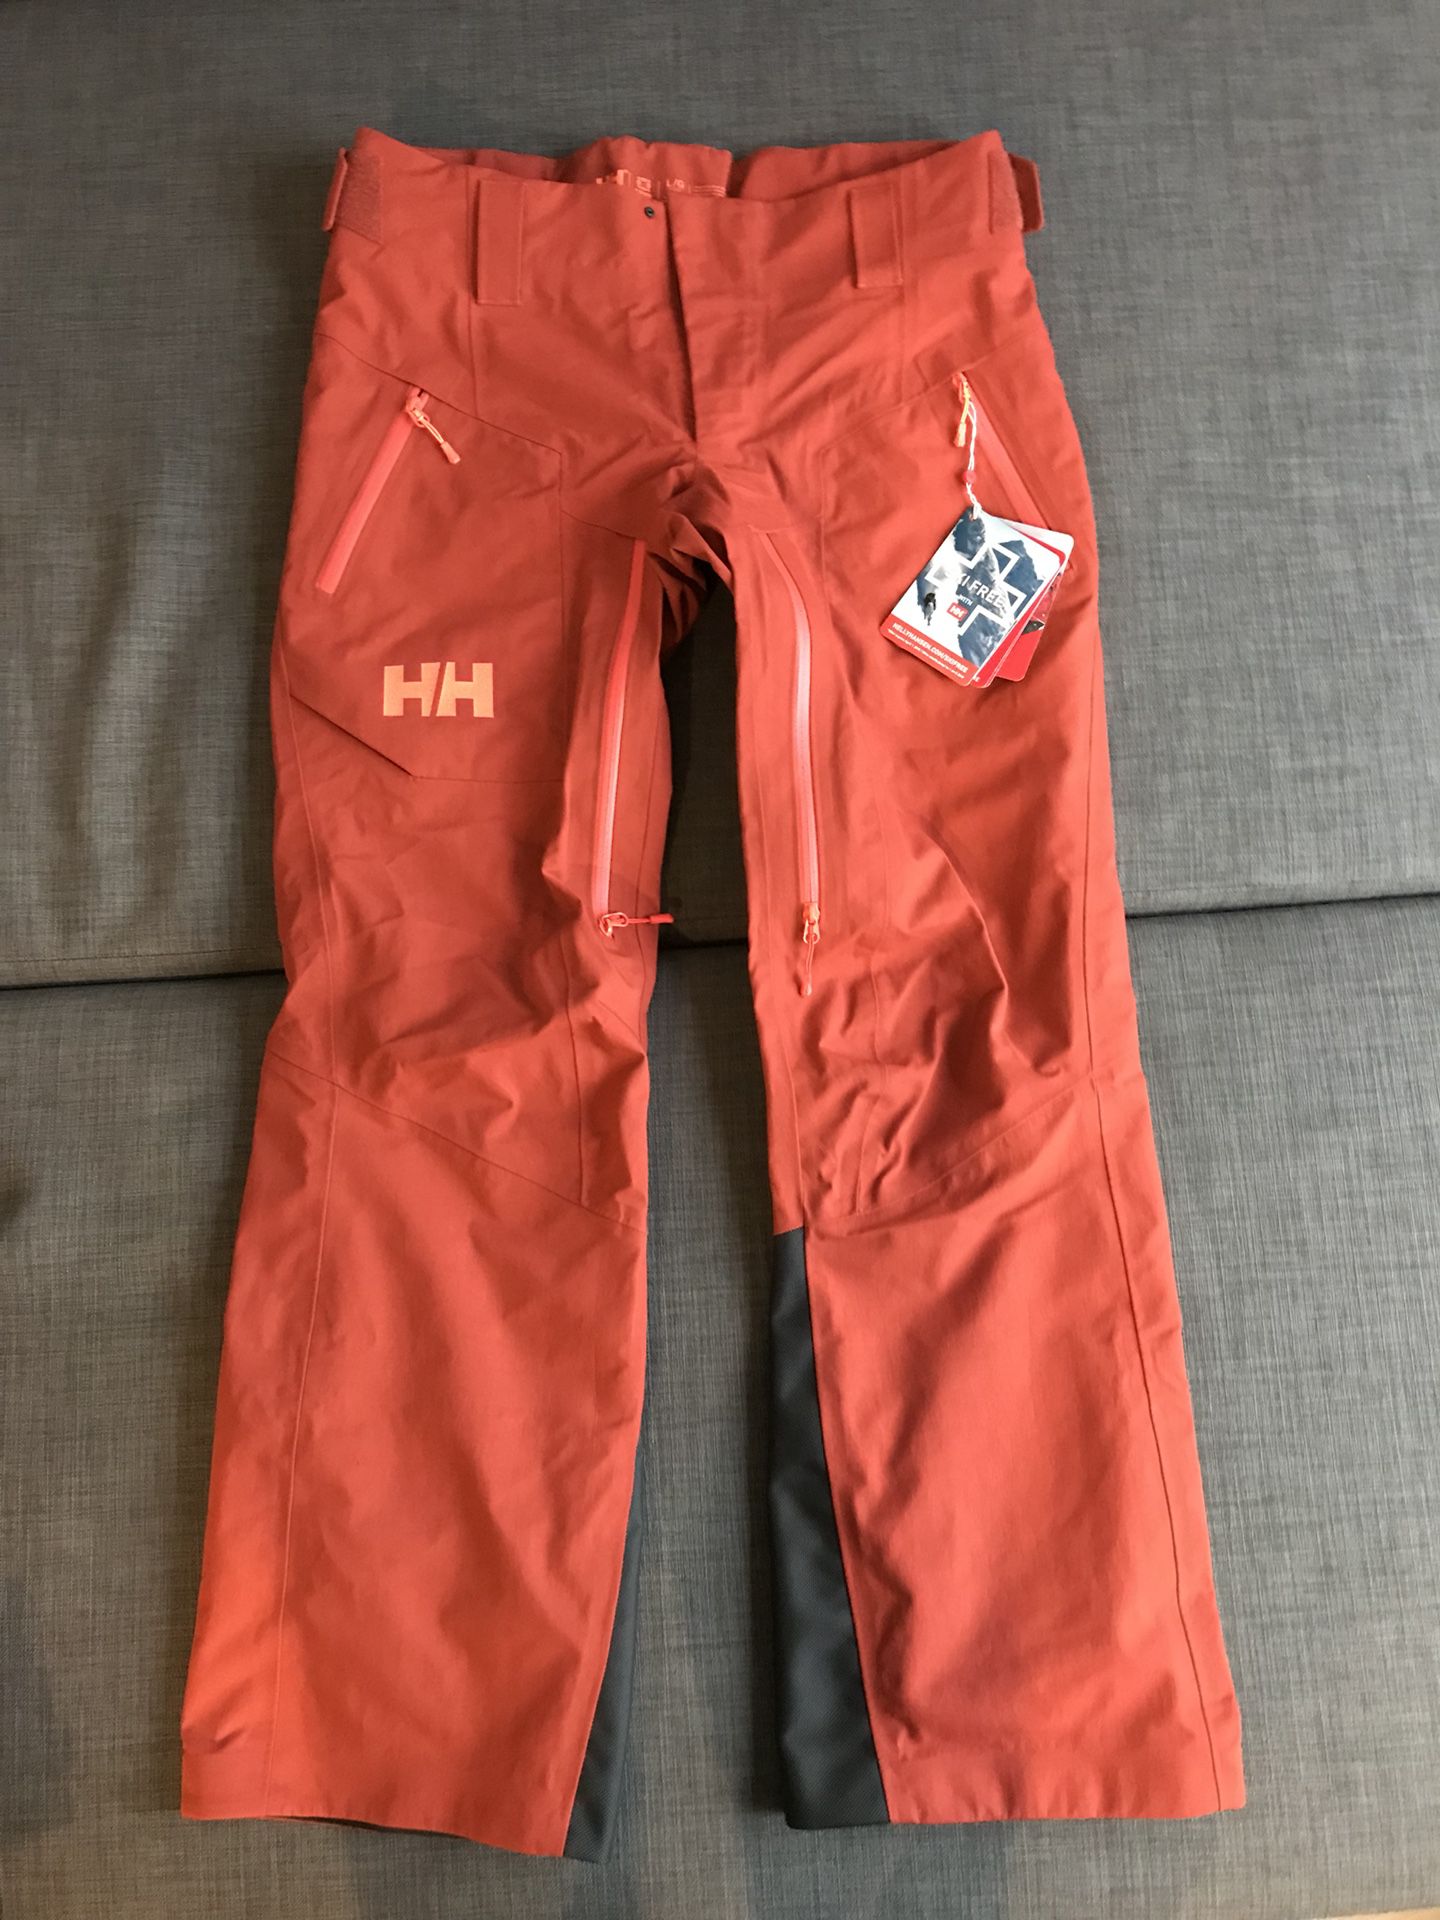 2019 Helly Hansen [Large] WASATCH SHELL Ski/snowboard Pants - MSRP $475 + Tax